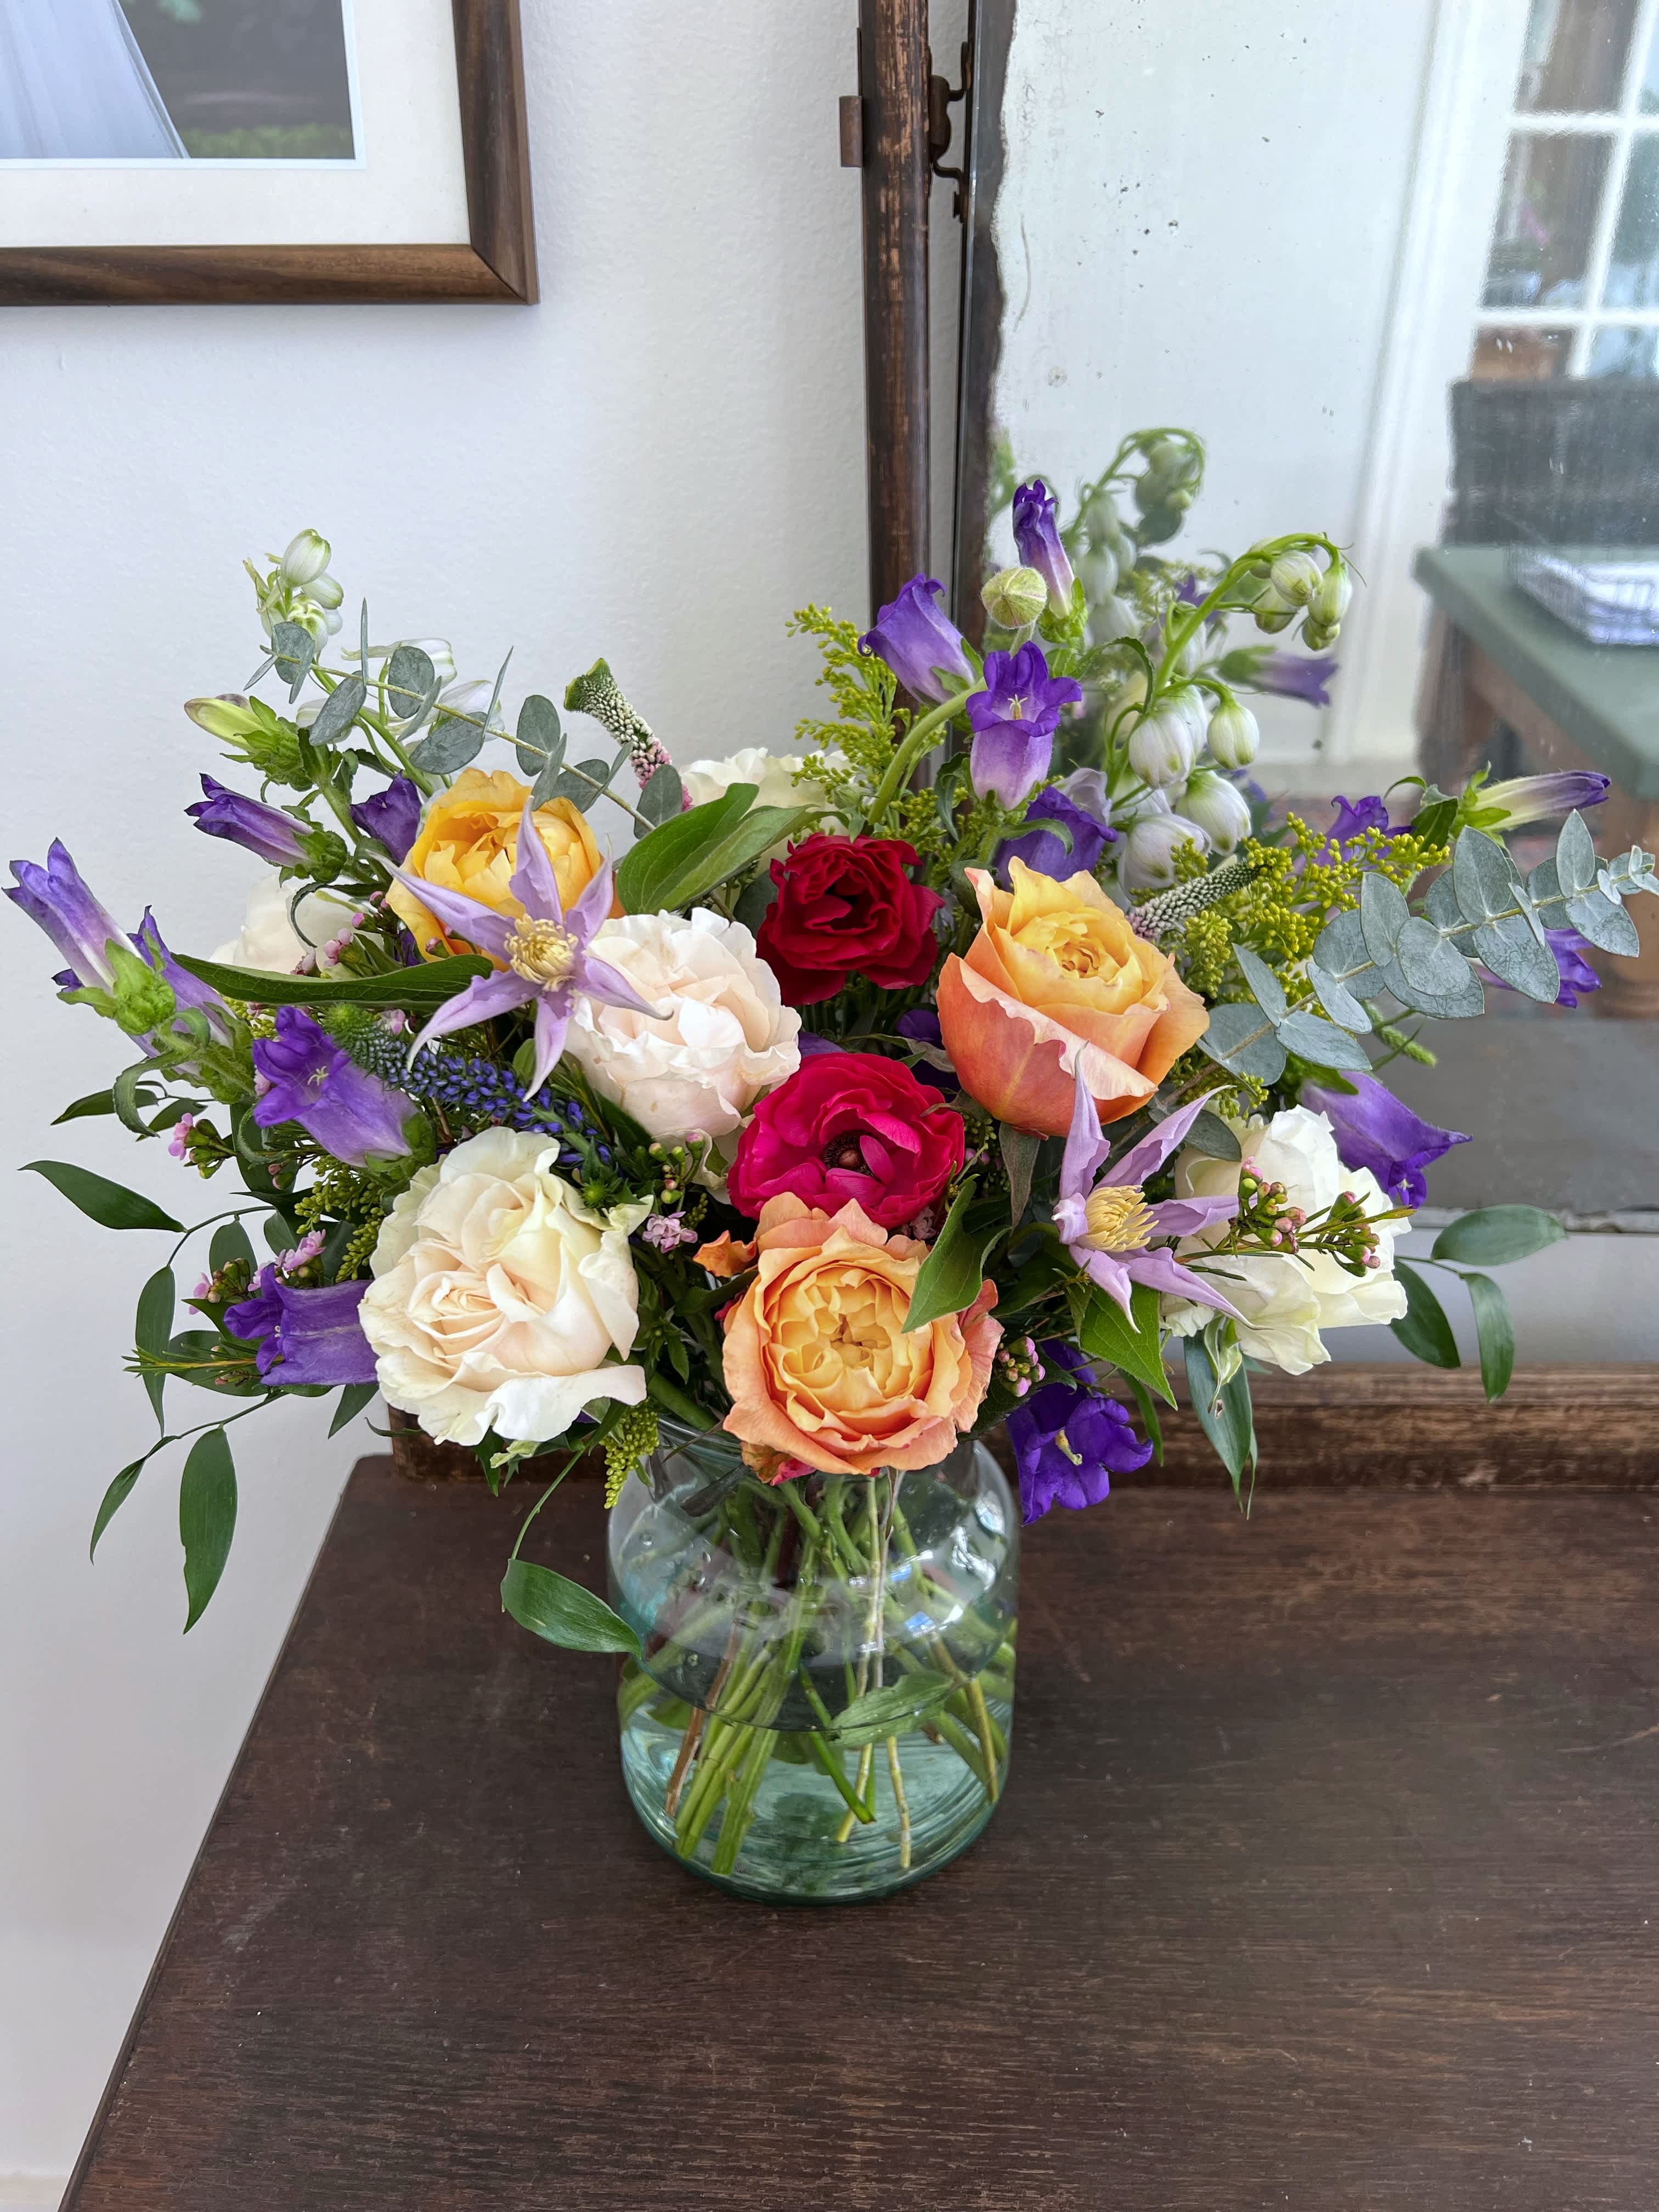 Spring Celebration - Perfect for that brunch or dinner party! The pastel color pallet screams spring! Arranged tall with the freshest in season florals.